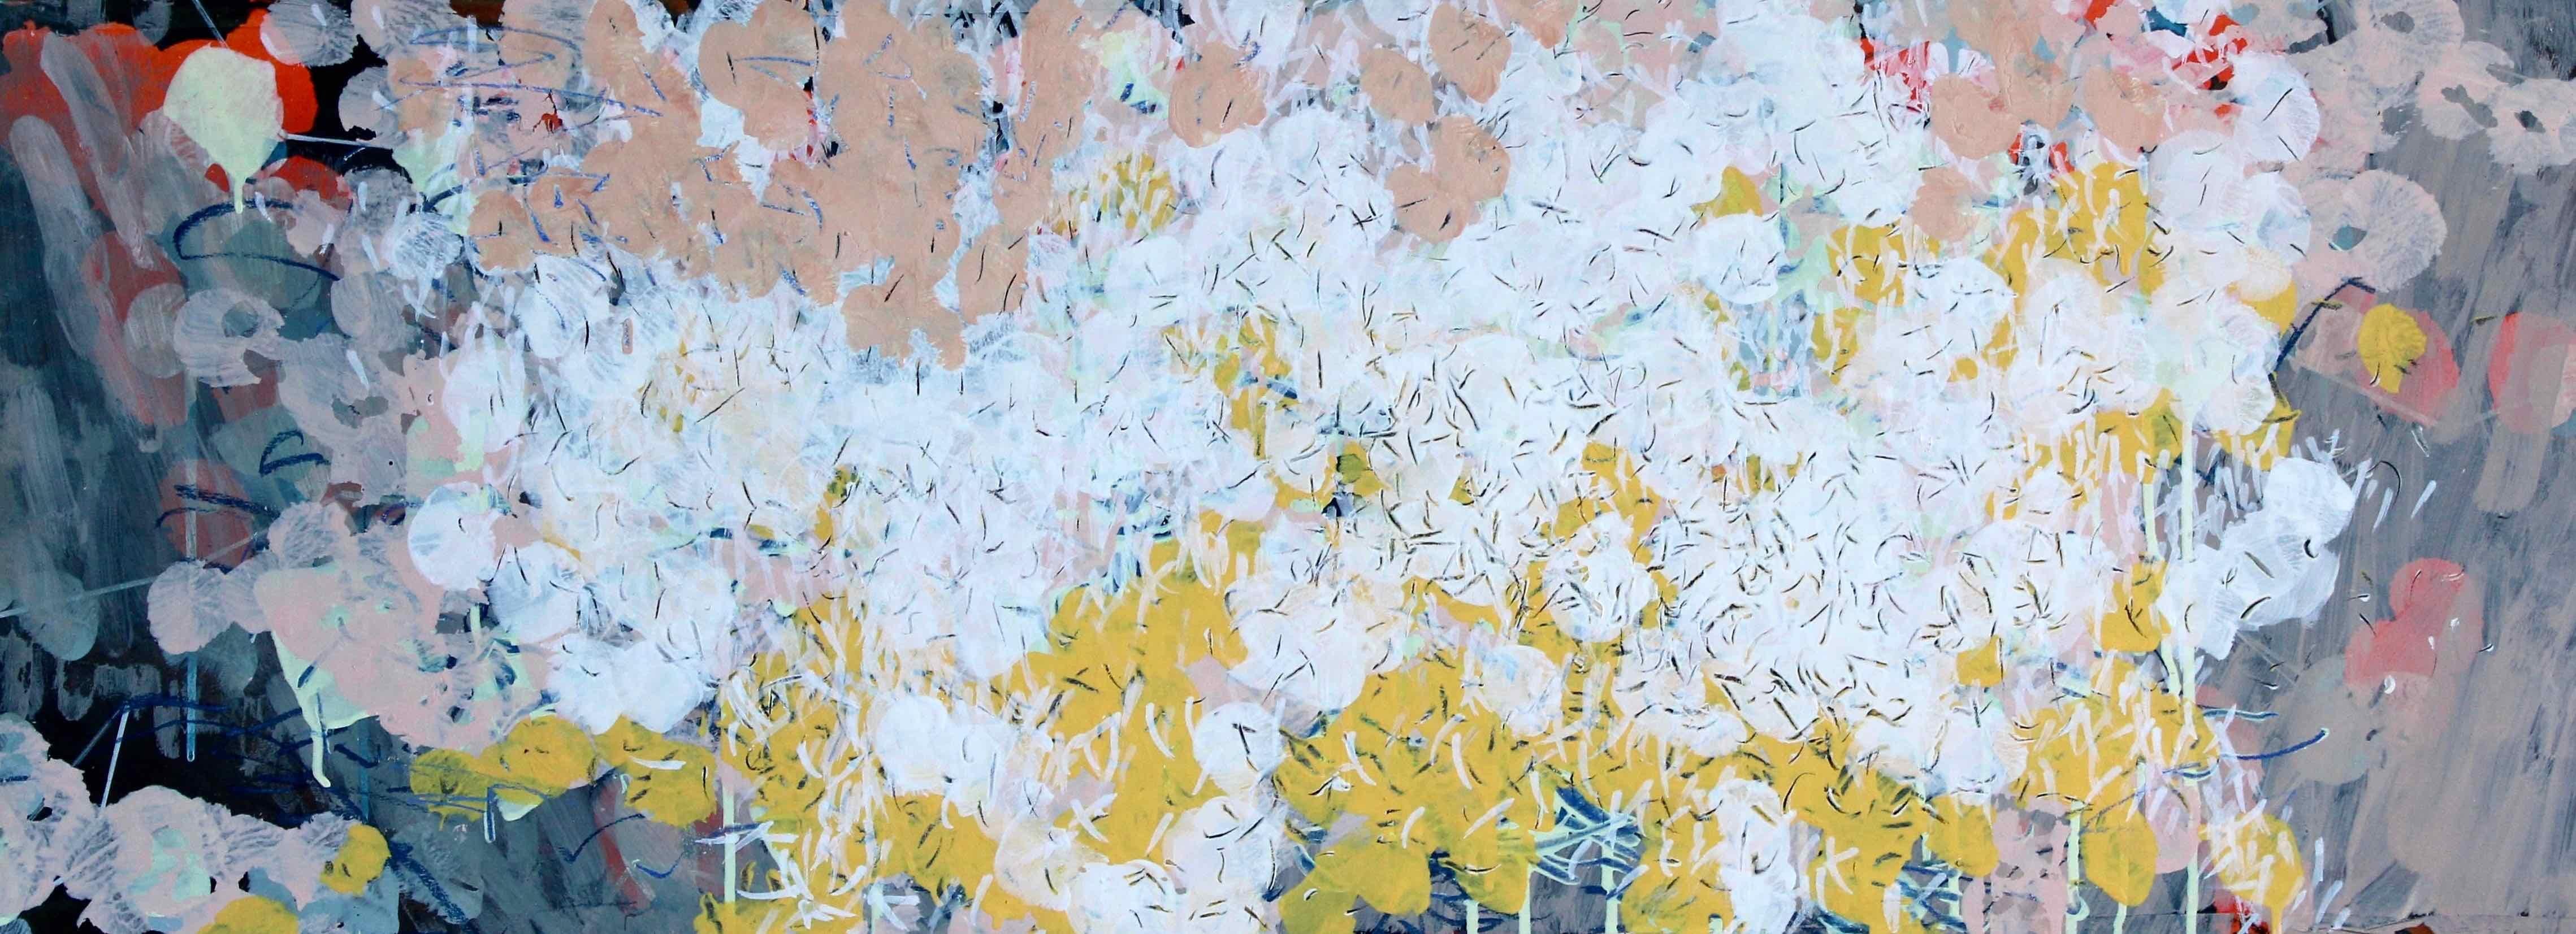 Swarm, small white (Gran Sasso) 4, 2018, Gouache, ink, pastel, watercolour on paper, 18 1/2 × 44 1/10 in; 47 × 112 cm by Sara Dudman RWA

Whilst on a residency in Italy, Sara Dudman saw a swarm of white butterflies and was fascinated by their flight